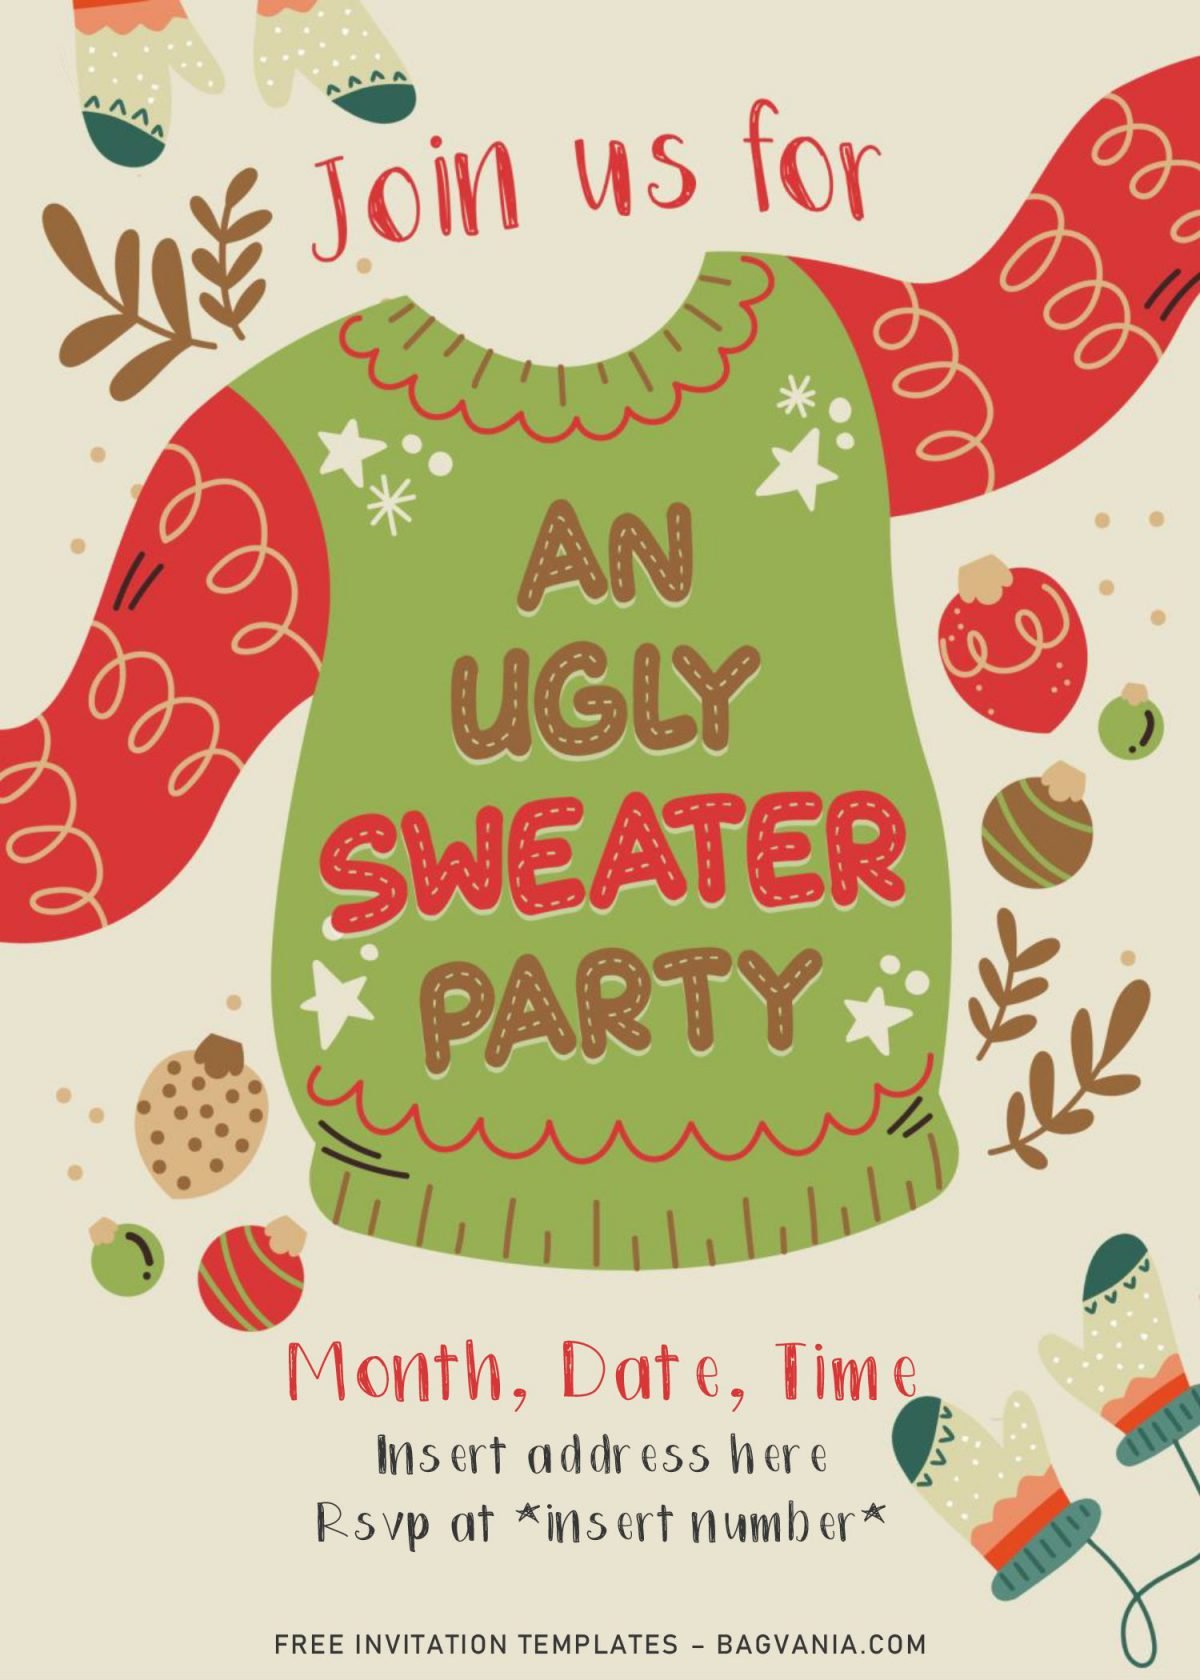 Free Winter Ugly Sweater Birthday Party Invitation Templates For Word and has Christmas ugly sweater